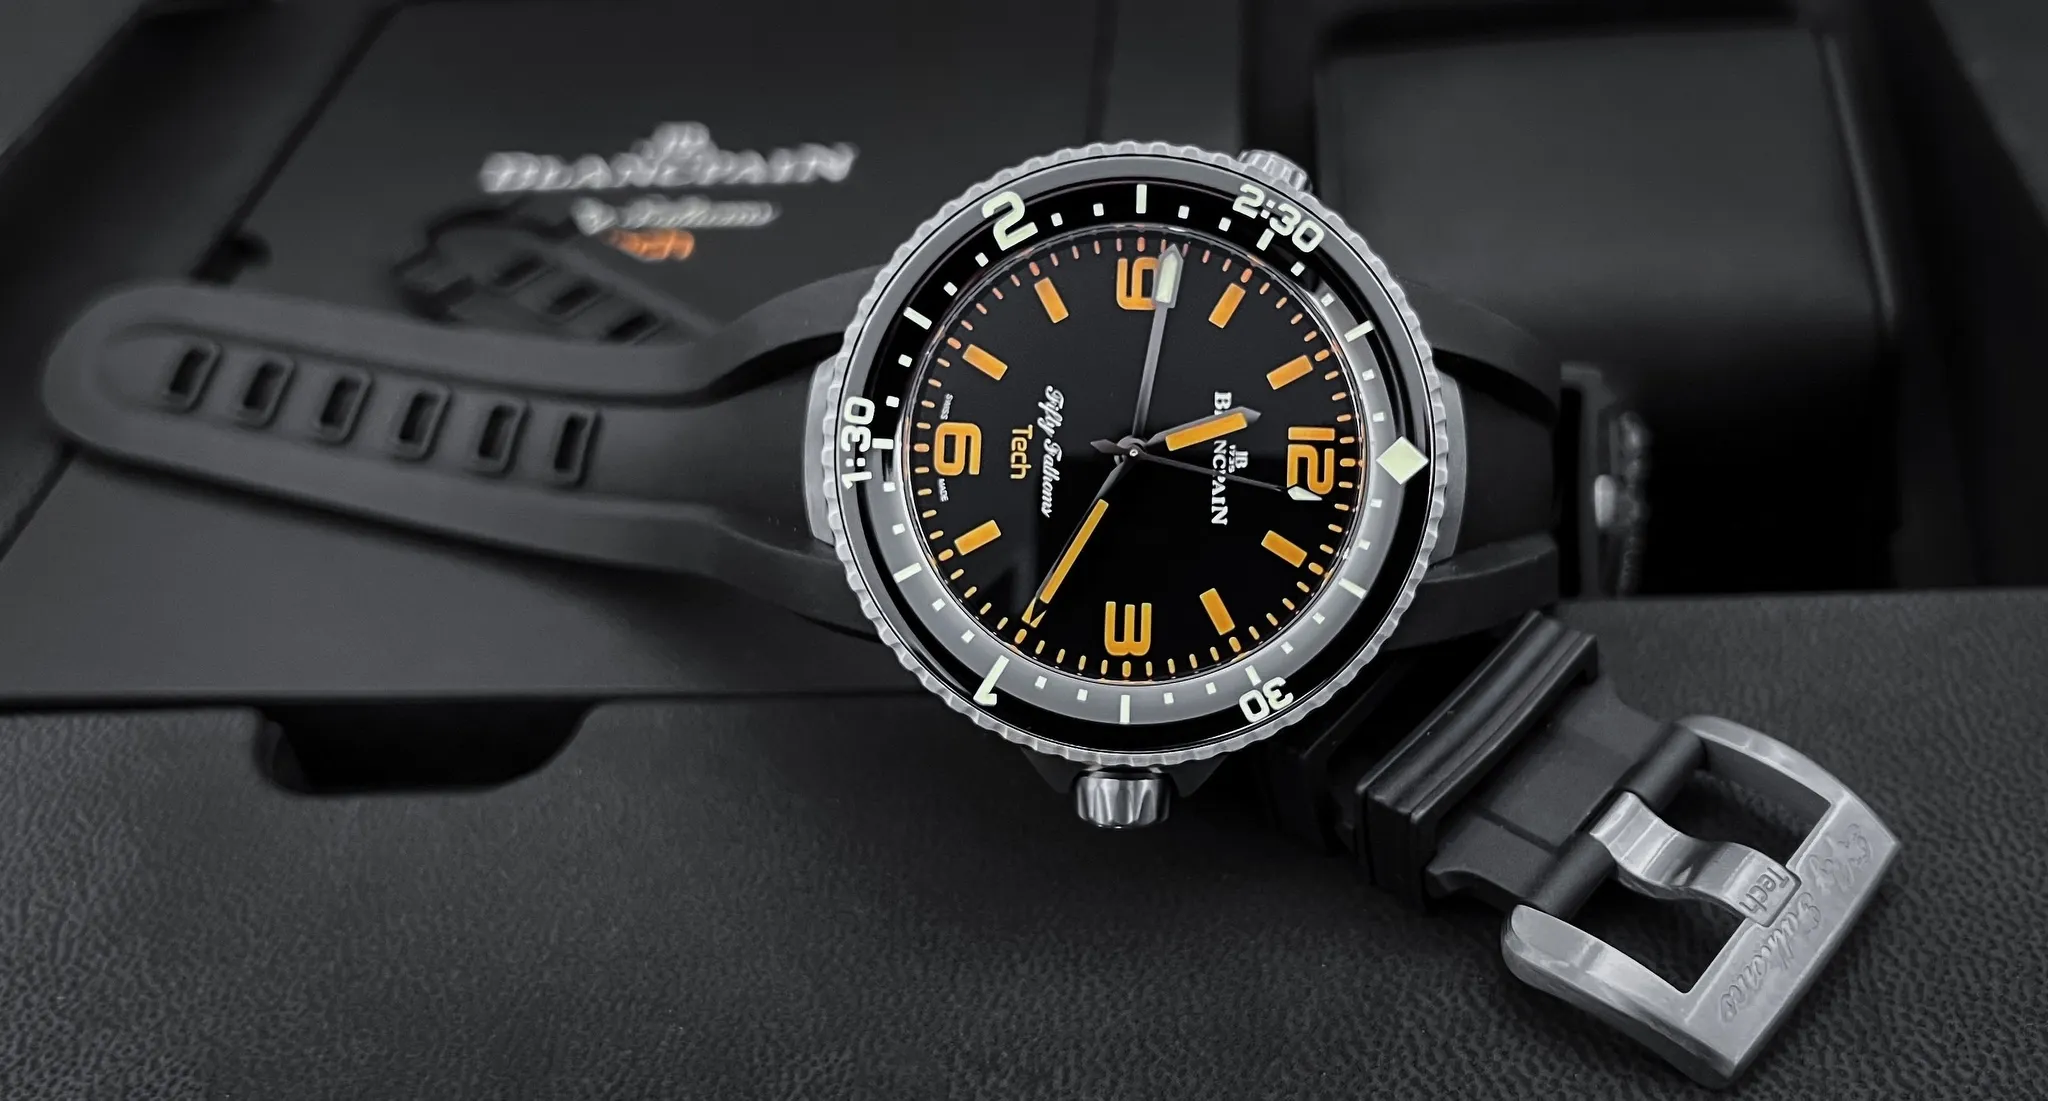 Blancpain in Germany, europe | Watches - Country Helper